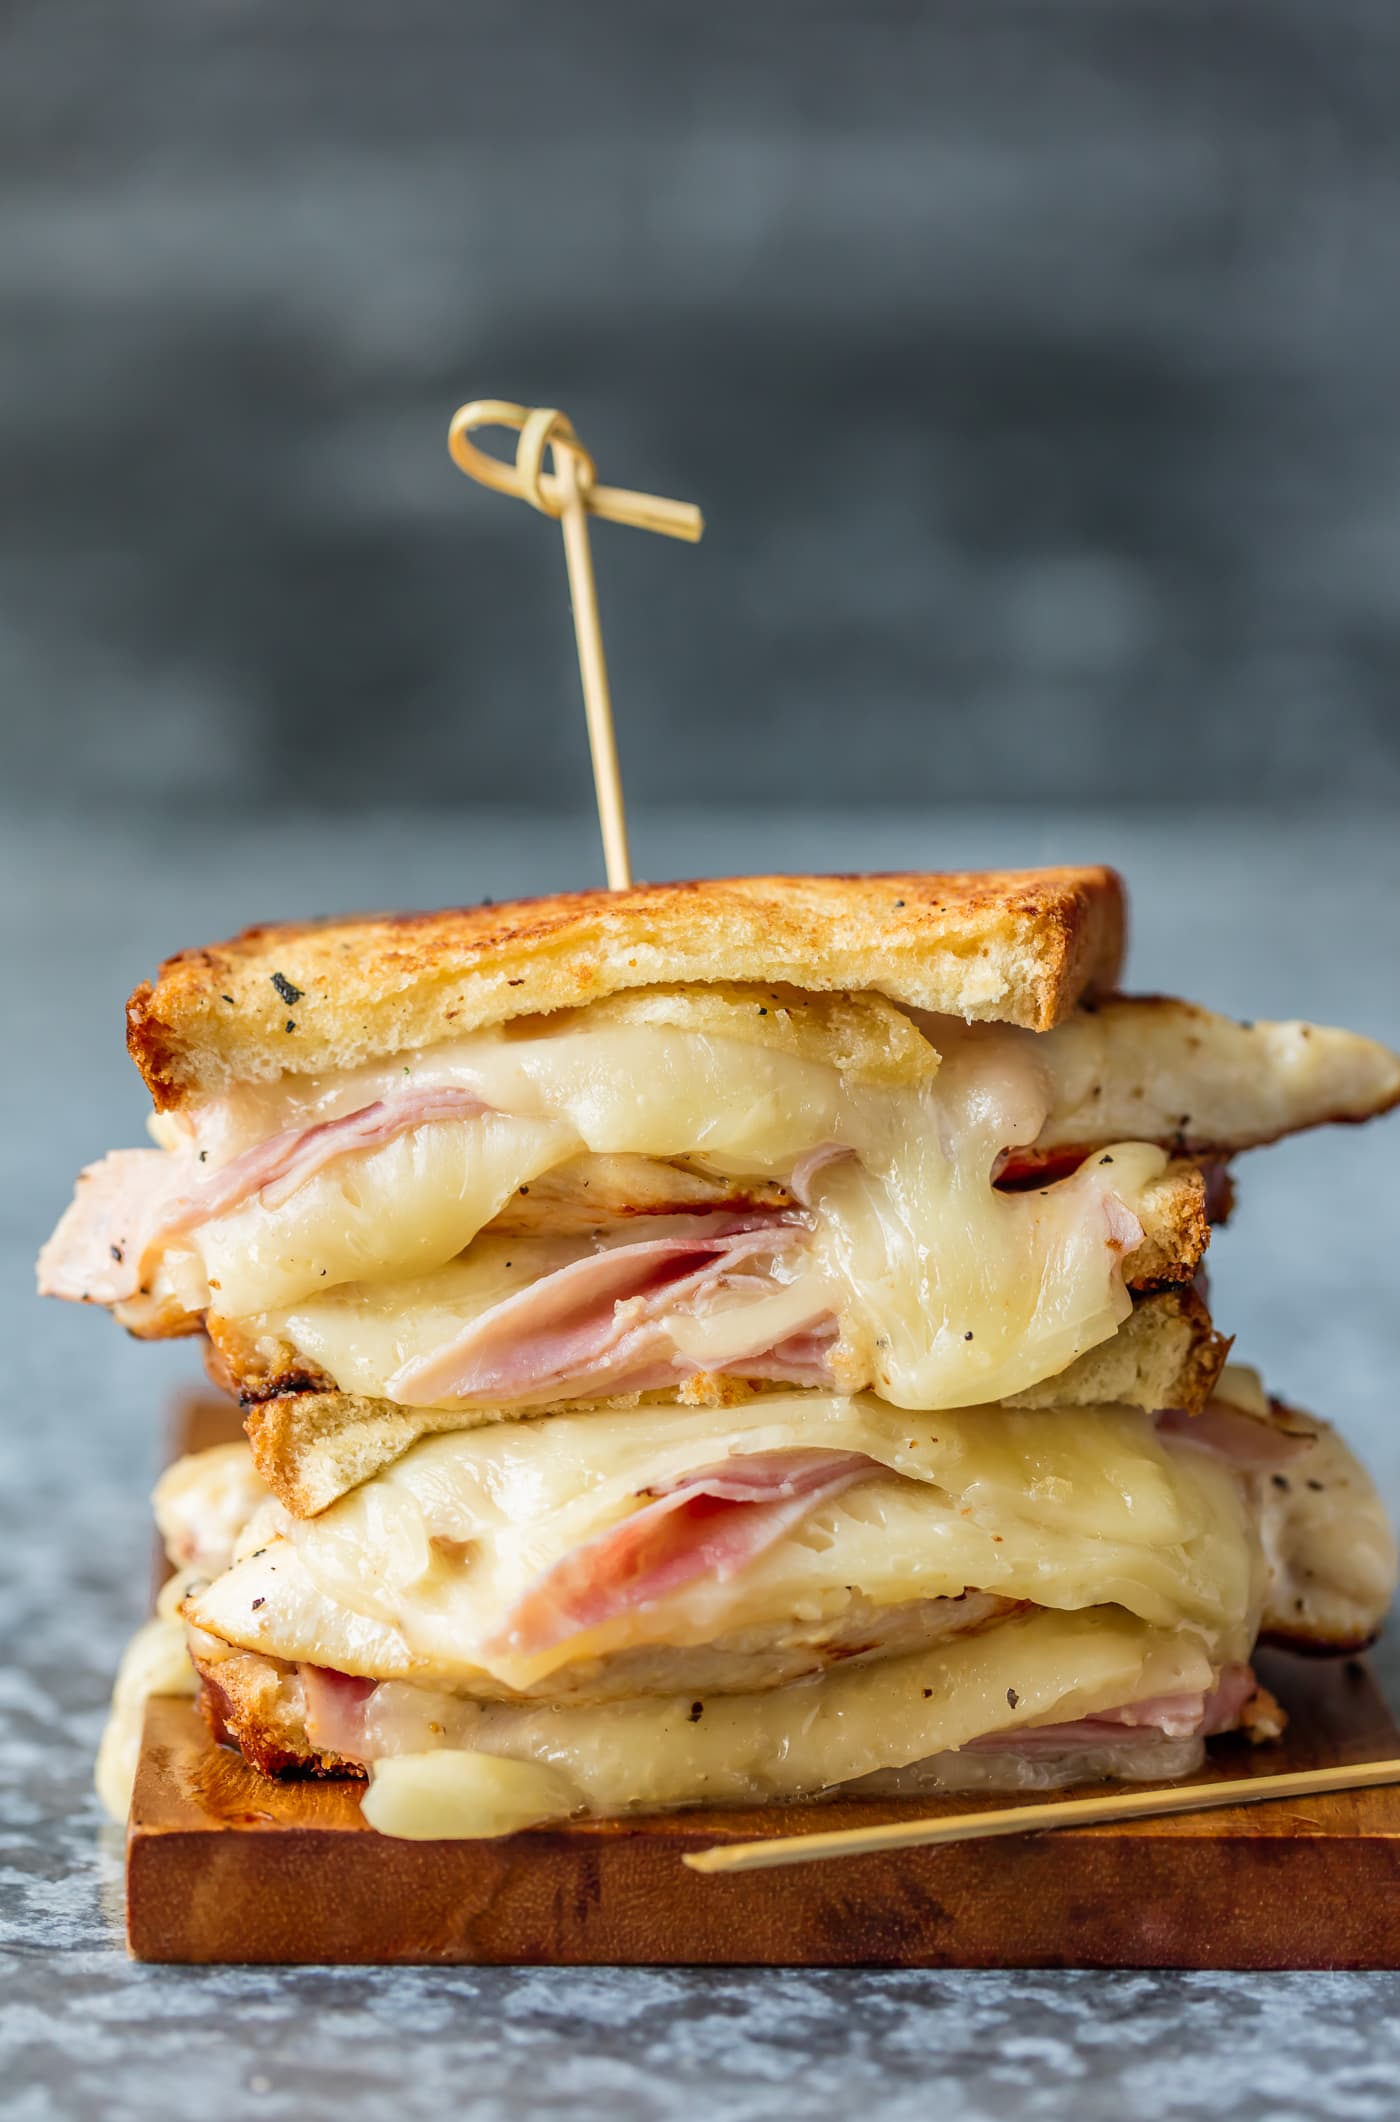 This GRILLED CHICKEN CORDON BLEU SANDWICH is so easy and so full of flavor! Kick your sandwich game up a notch with layers of grilled chicken, creamy swiss, honey ham, and buttered bread.